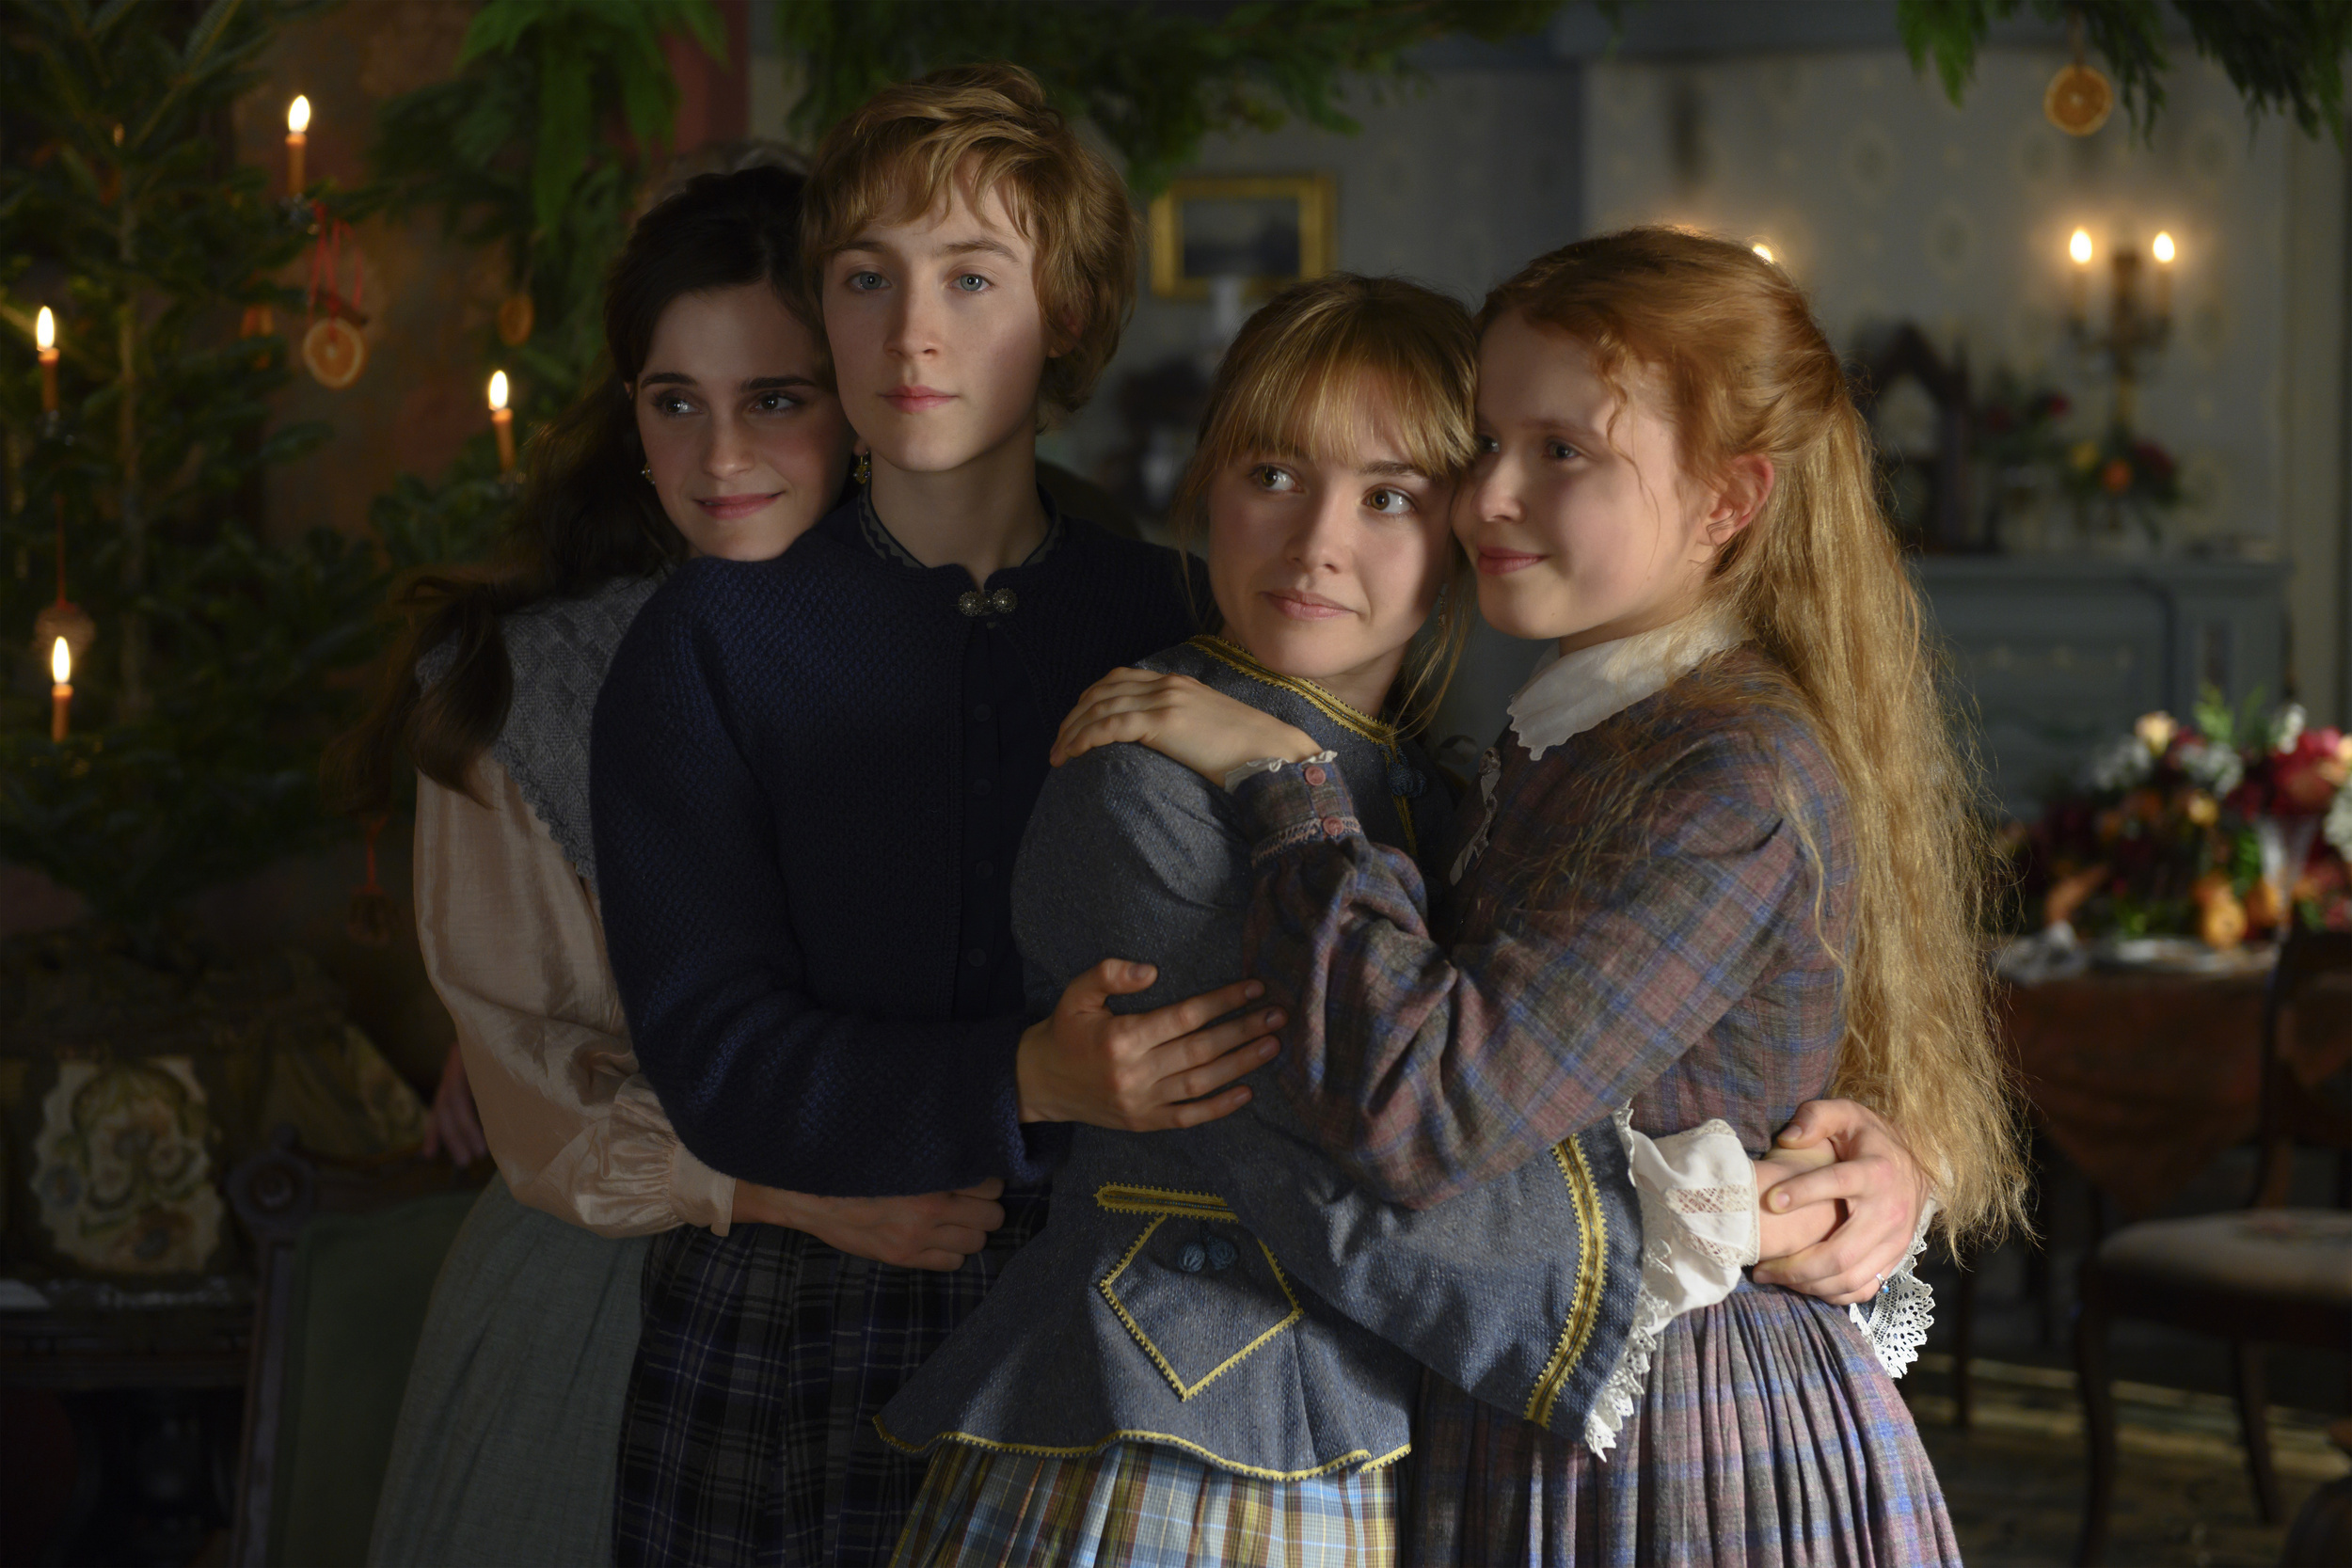 <p>Classic book adaptations are difficult to master, especially when the director wants to modernize the story without sacrificing its integrity. Luckily, <em>Little Women</em> was adapted by an expert writer and director, Greta Gerwig, and it resulted in an adaptation that was a beautiful homage to Louisa May Alcott. </p><p><a href='https://www.msn.com/en-us/community/channel/vid-cj9pqbr0vn9in2b6ddcd8sfgpfq6x6utp44fssrv6mc2gtybw0us'>Follow us on MSN to see more of our exclusive entertainment content.</a></p>